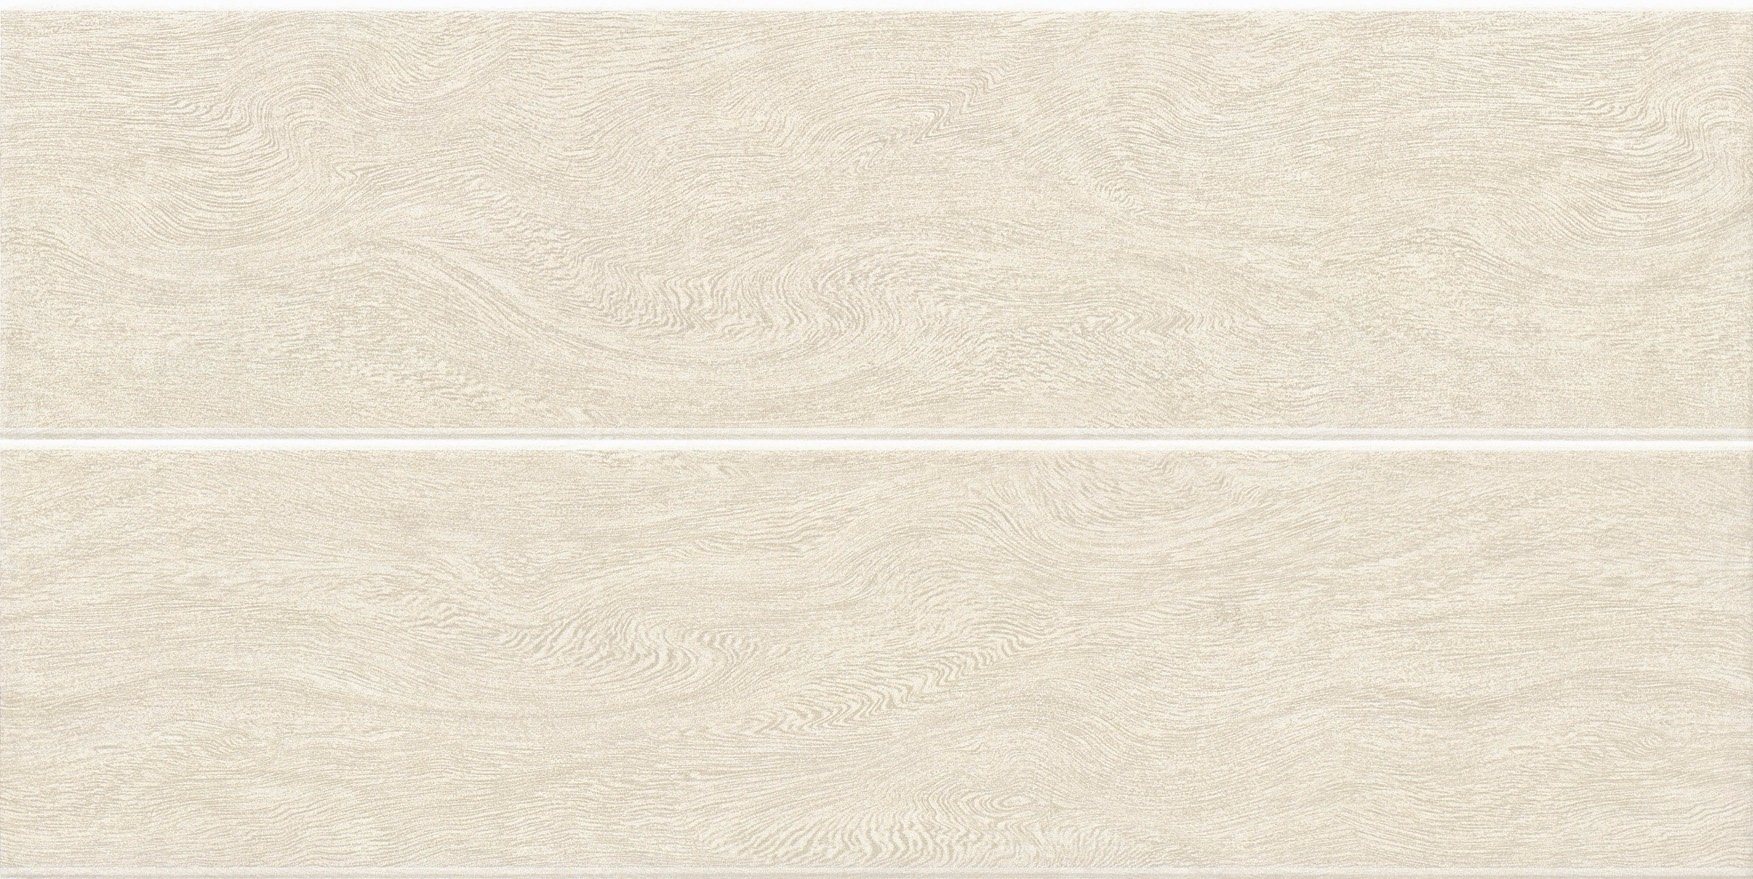 300X600mm White Marble Design Ceramic Wall Tile for Interior Decoration